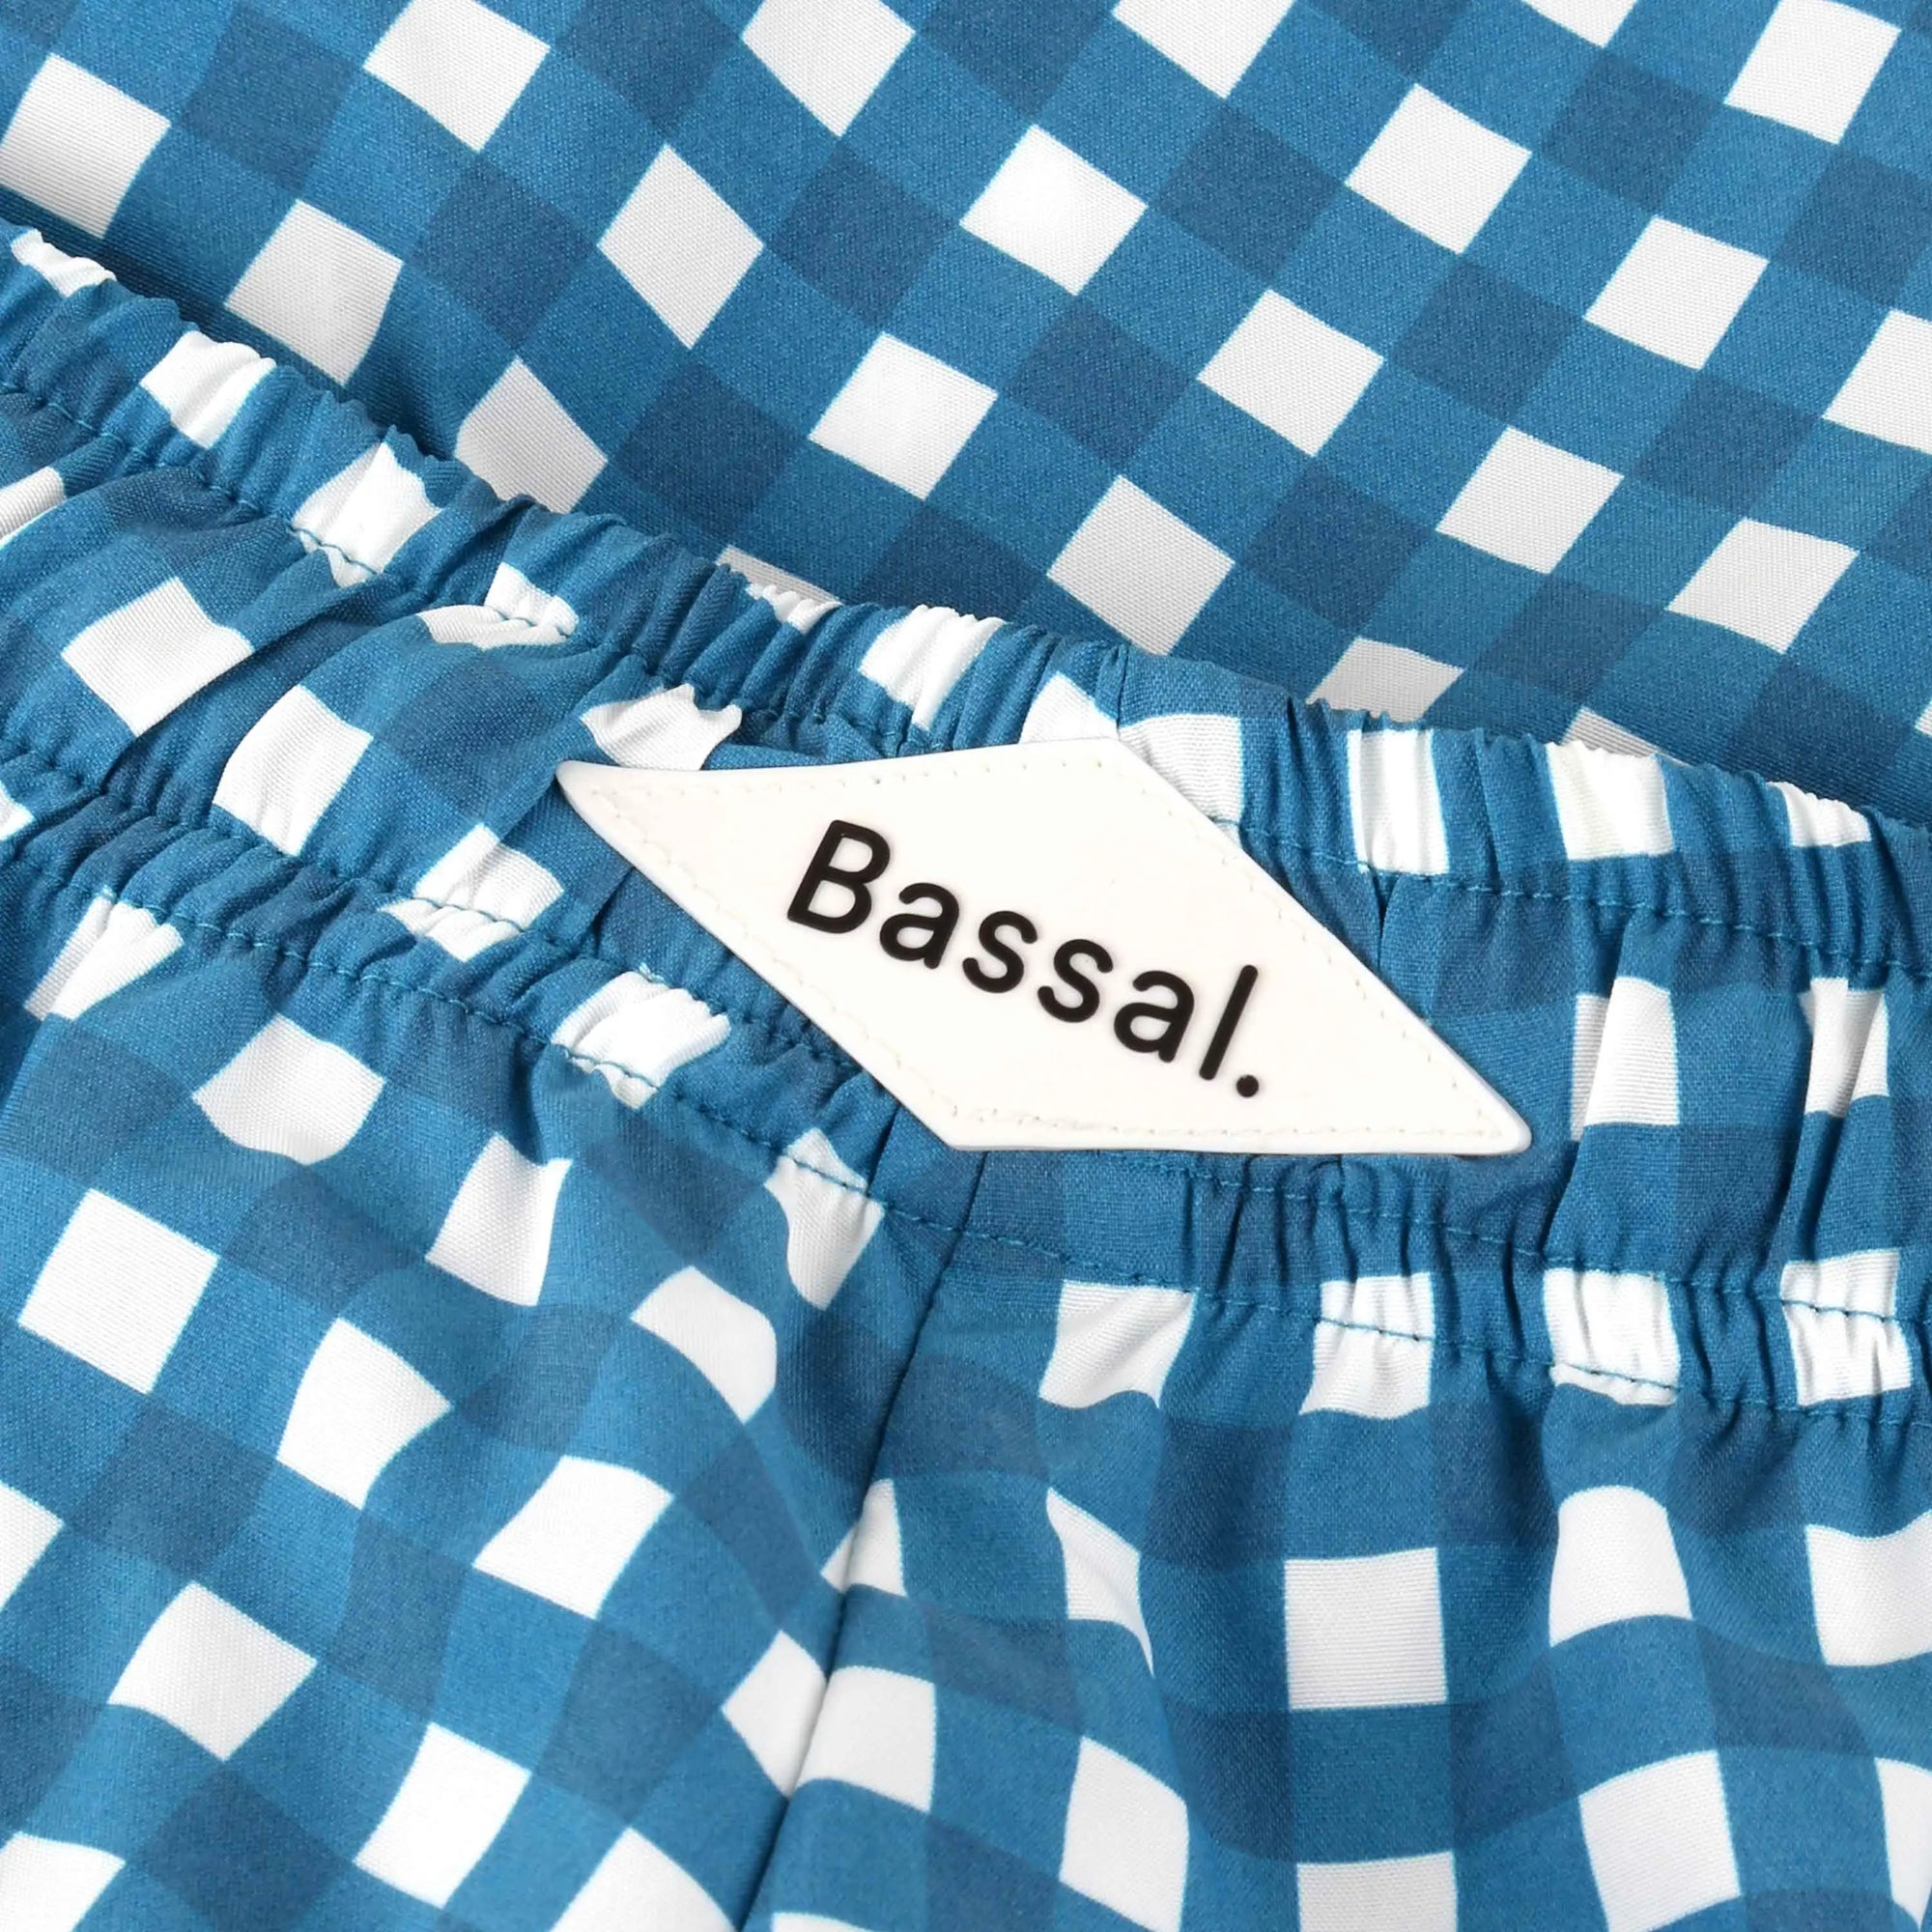 A white box from bassalstore contains Vichy Swimwear, neatly folded, and accompanied by a tag displaying the brand name "Bassal." The box lid is partially open and also has "Bassal" written on it. A touch of Barcelona style right at your doorstep.